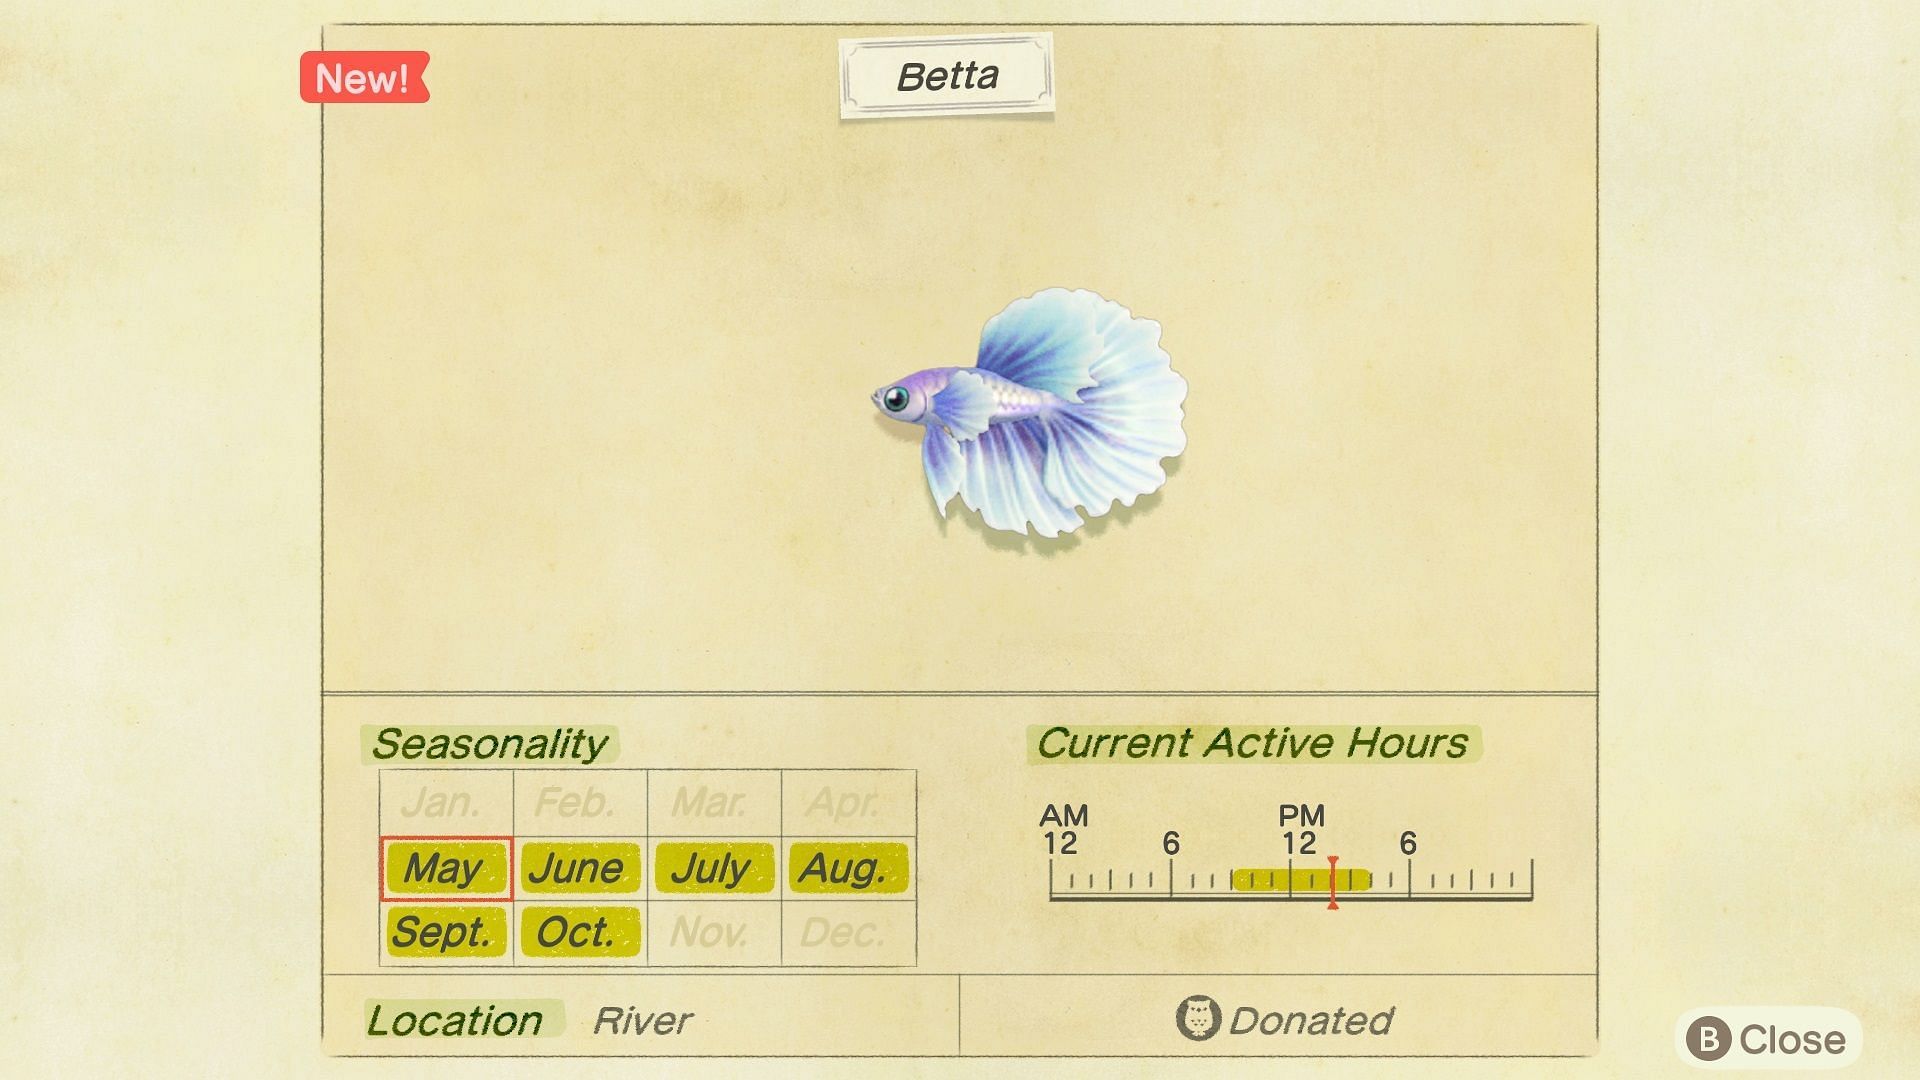 The Betta fish will be arriving in the Southern Hemisphere in November. (Image via Nintendo)